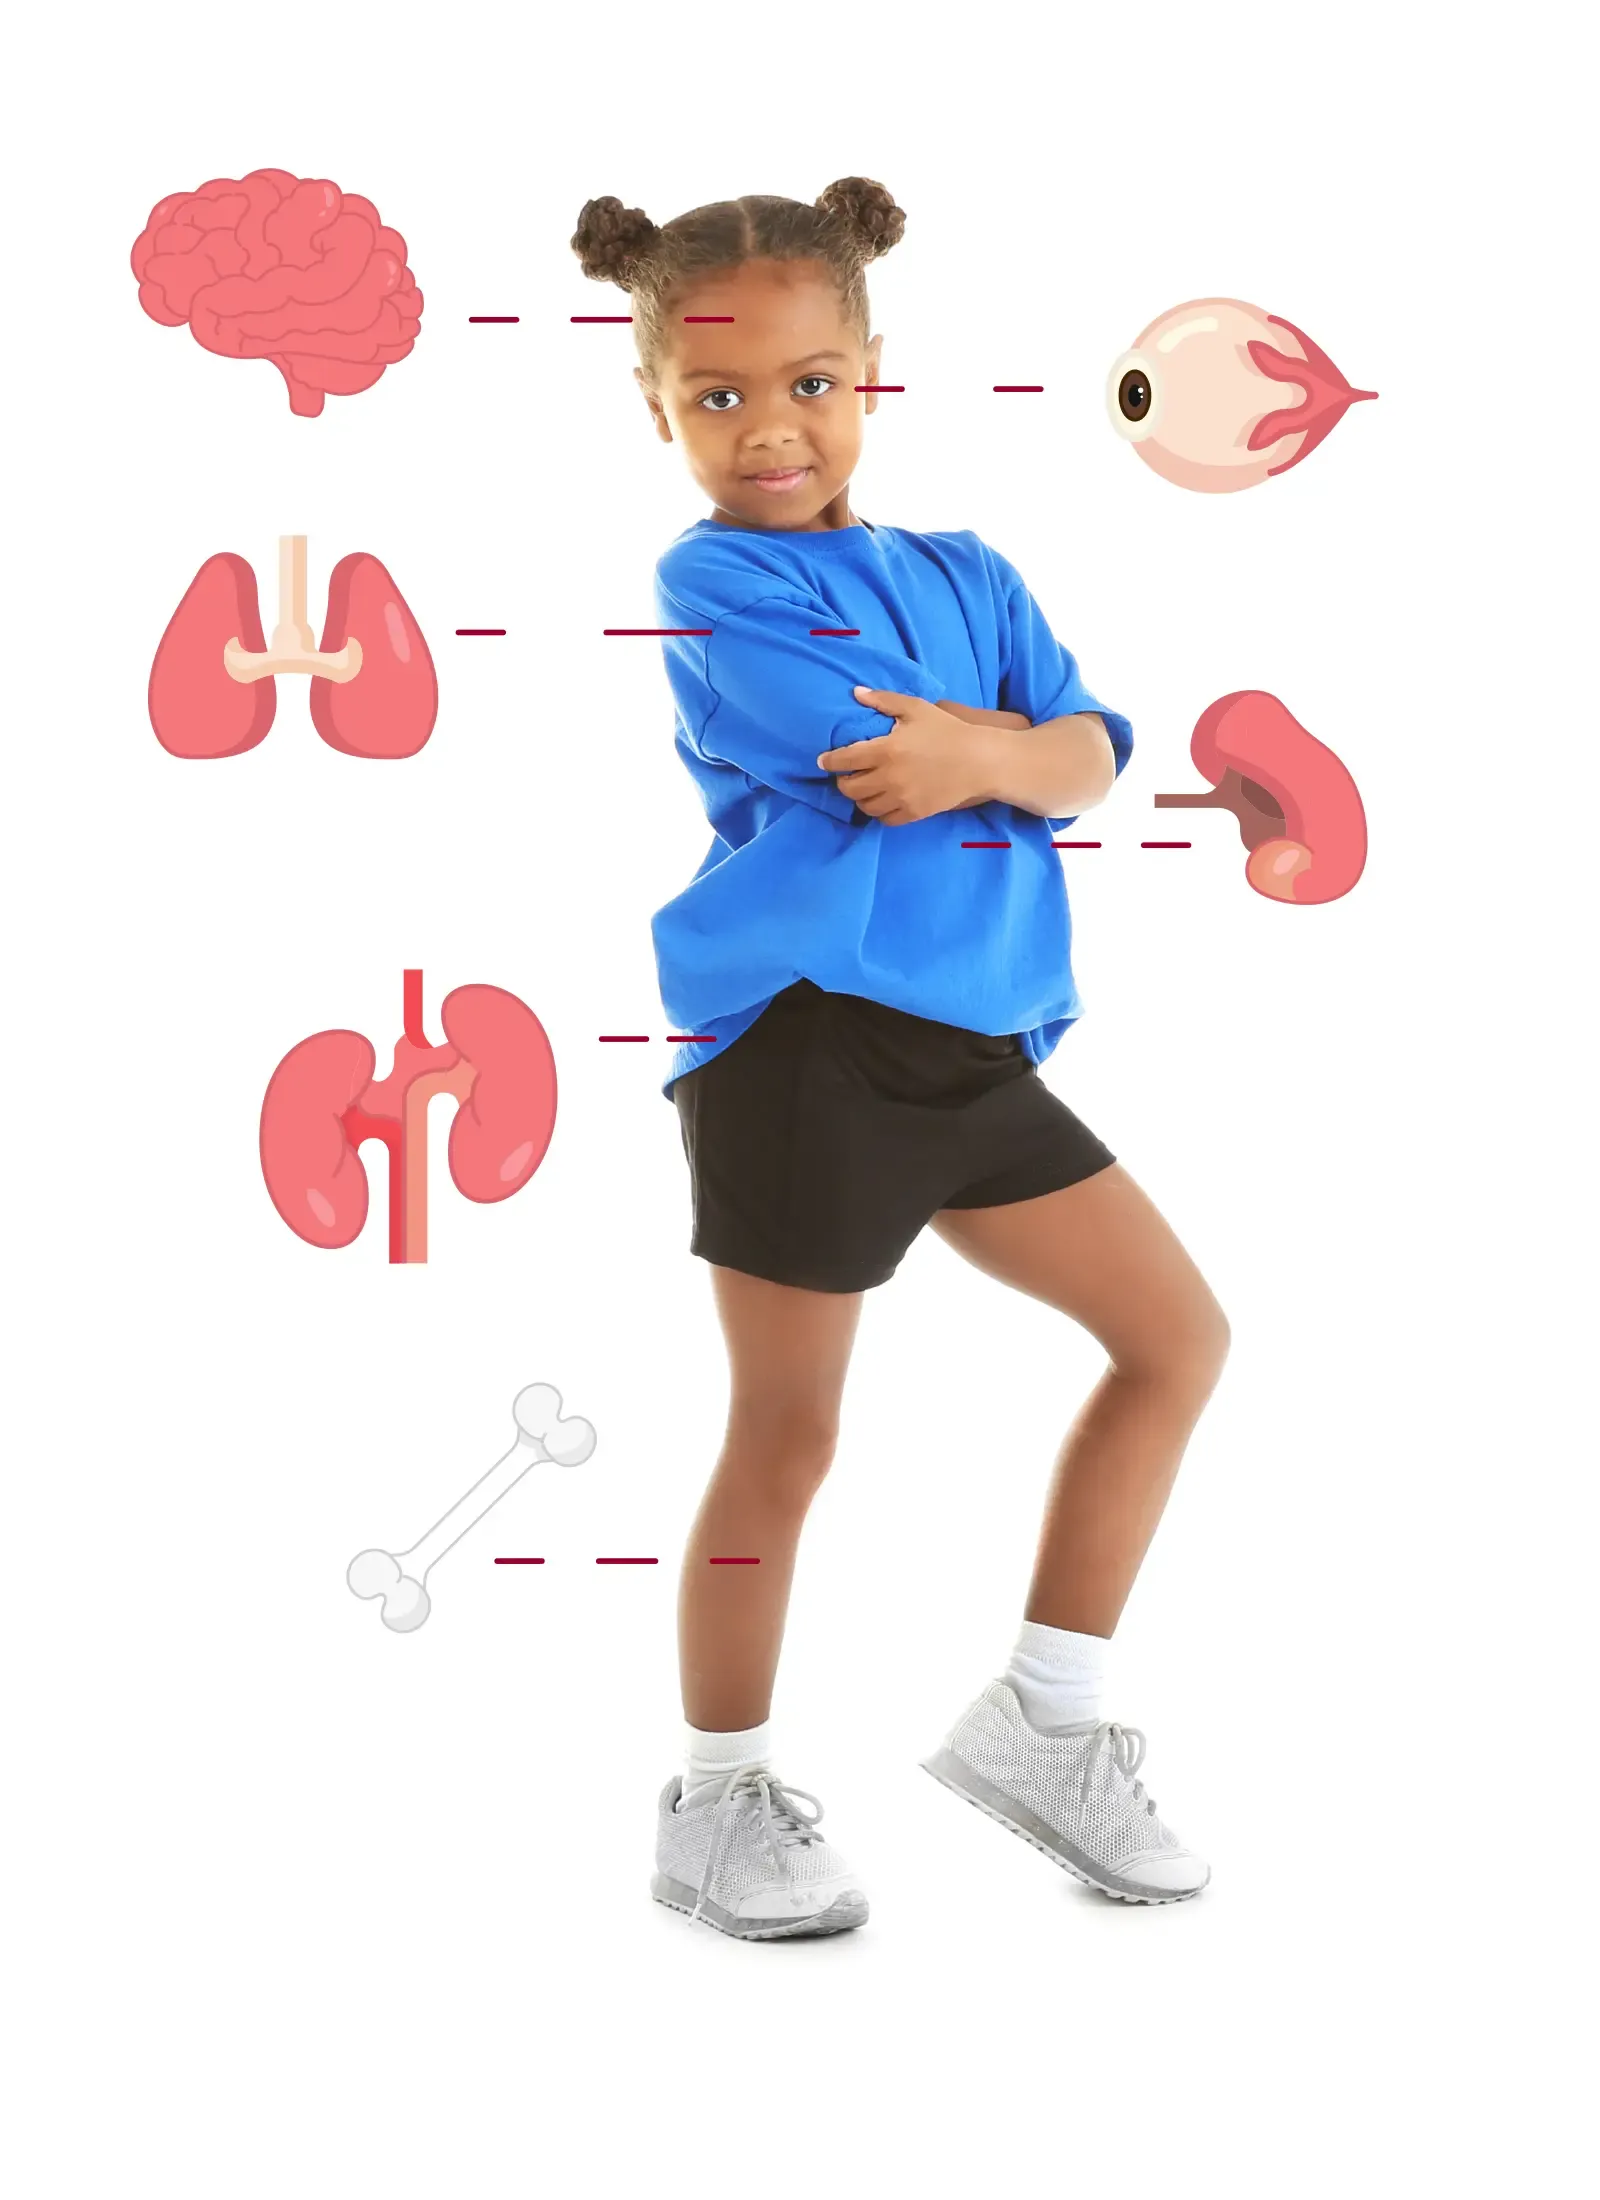 Child and organs affected by SCD